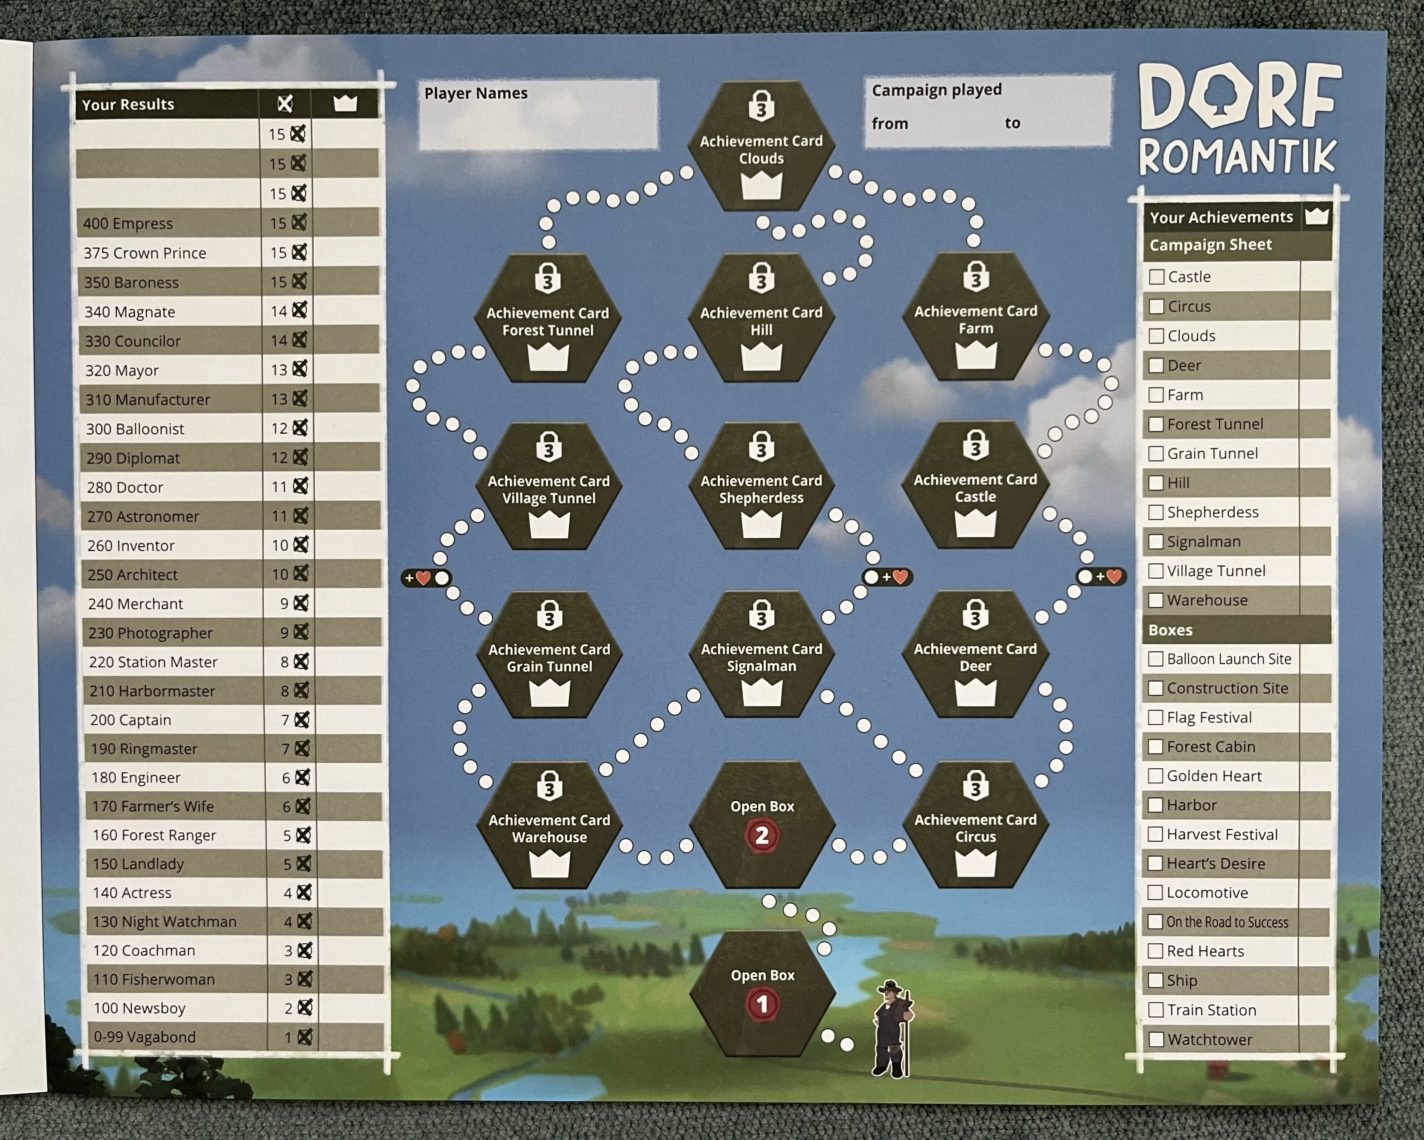 Campaign sheet for Dorfromantik: The Board Game, showing VP thresholds, achievement list, and unlocking path.